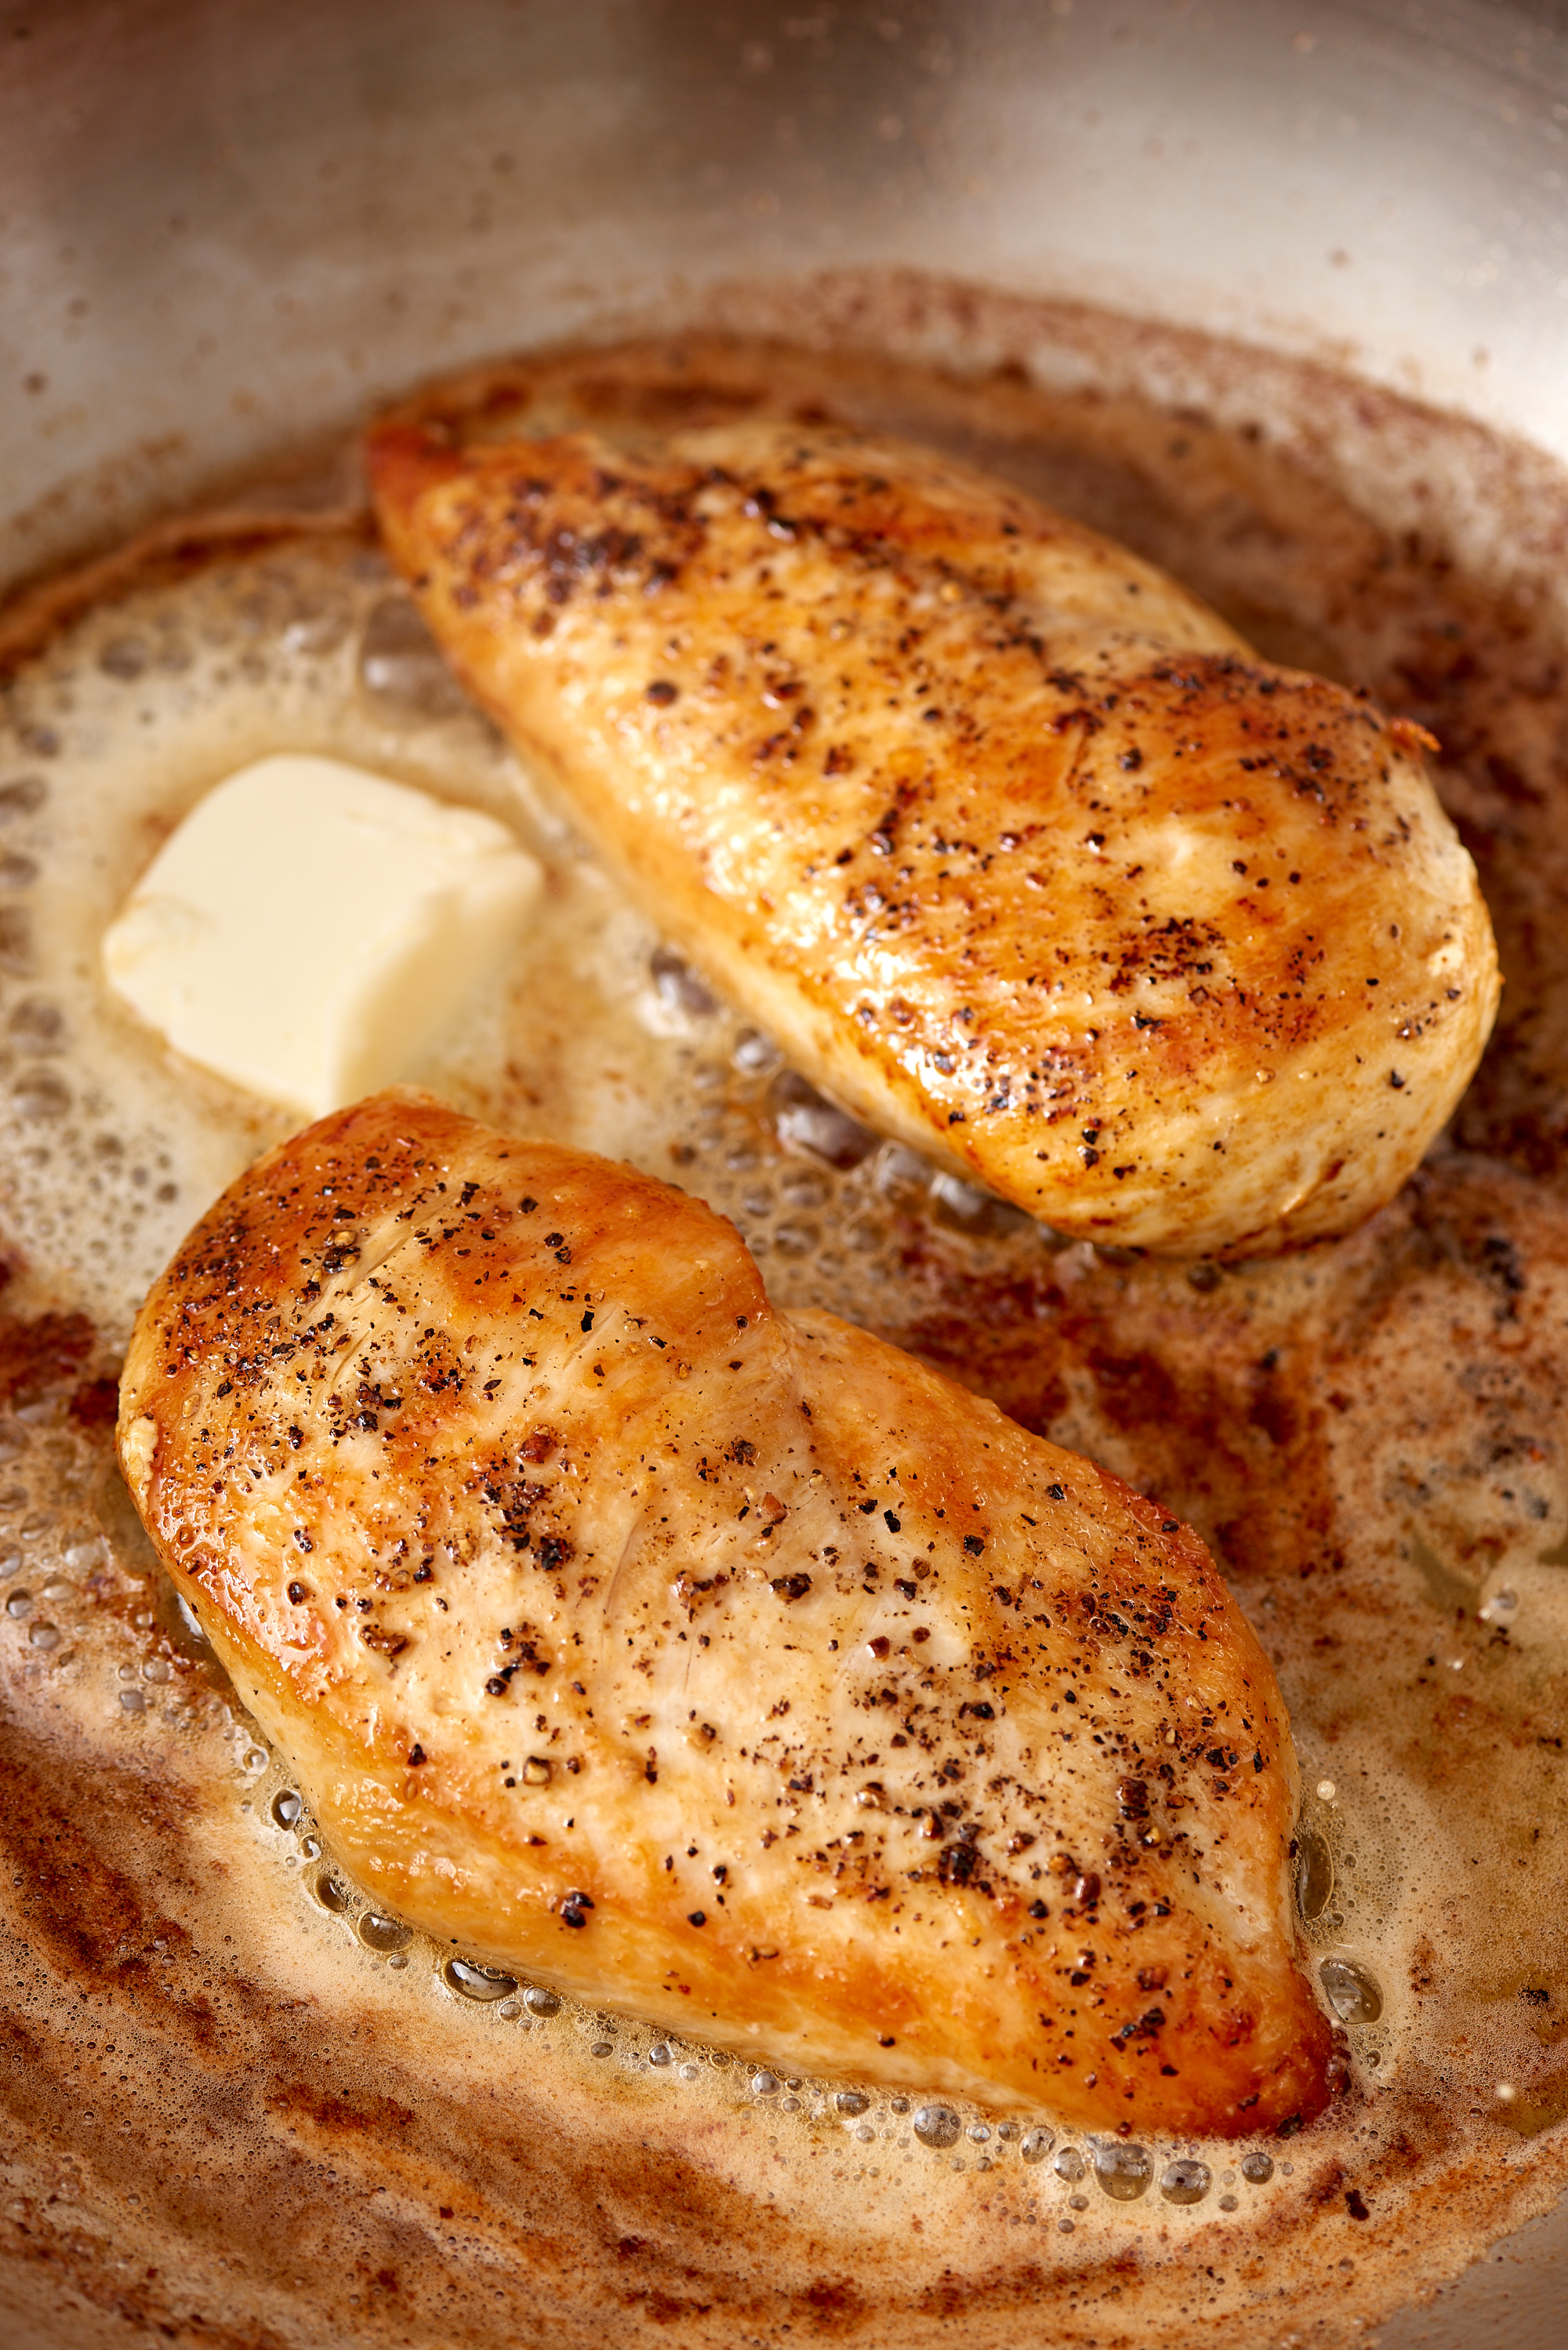 How to cook chicken breast